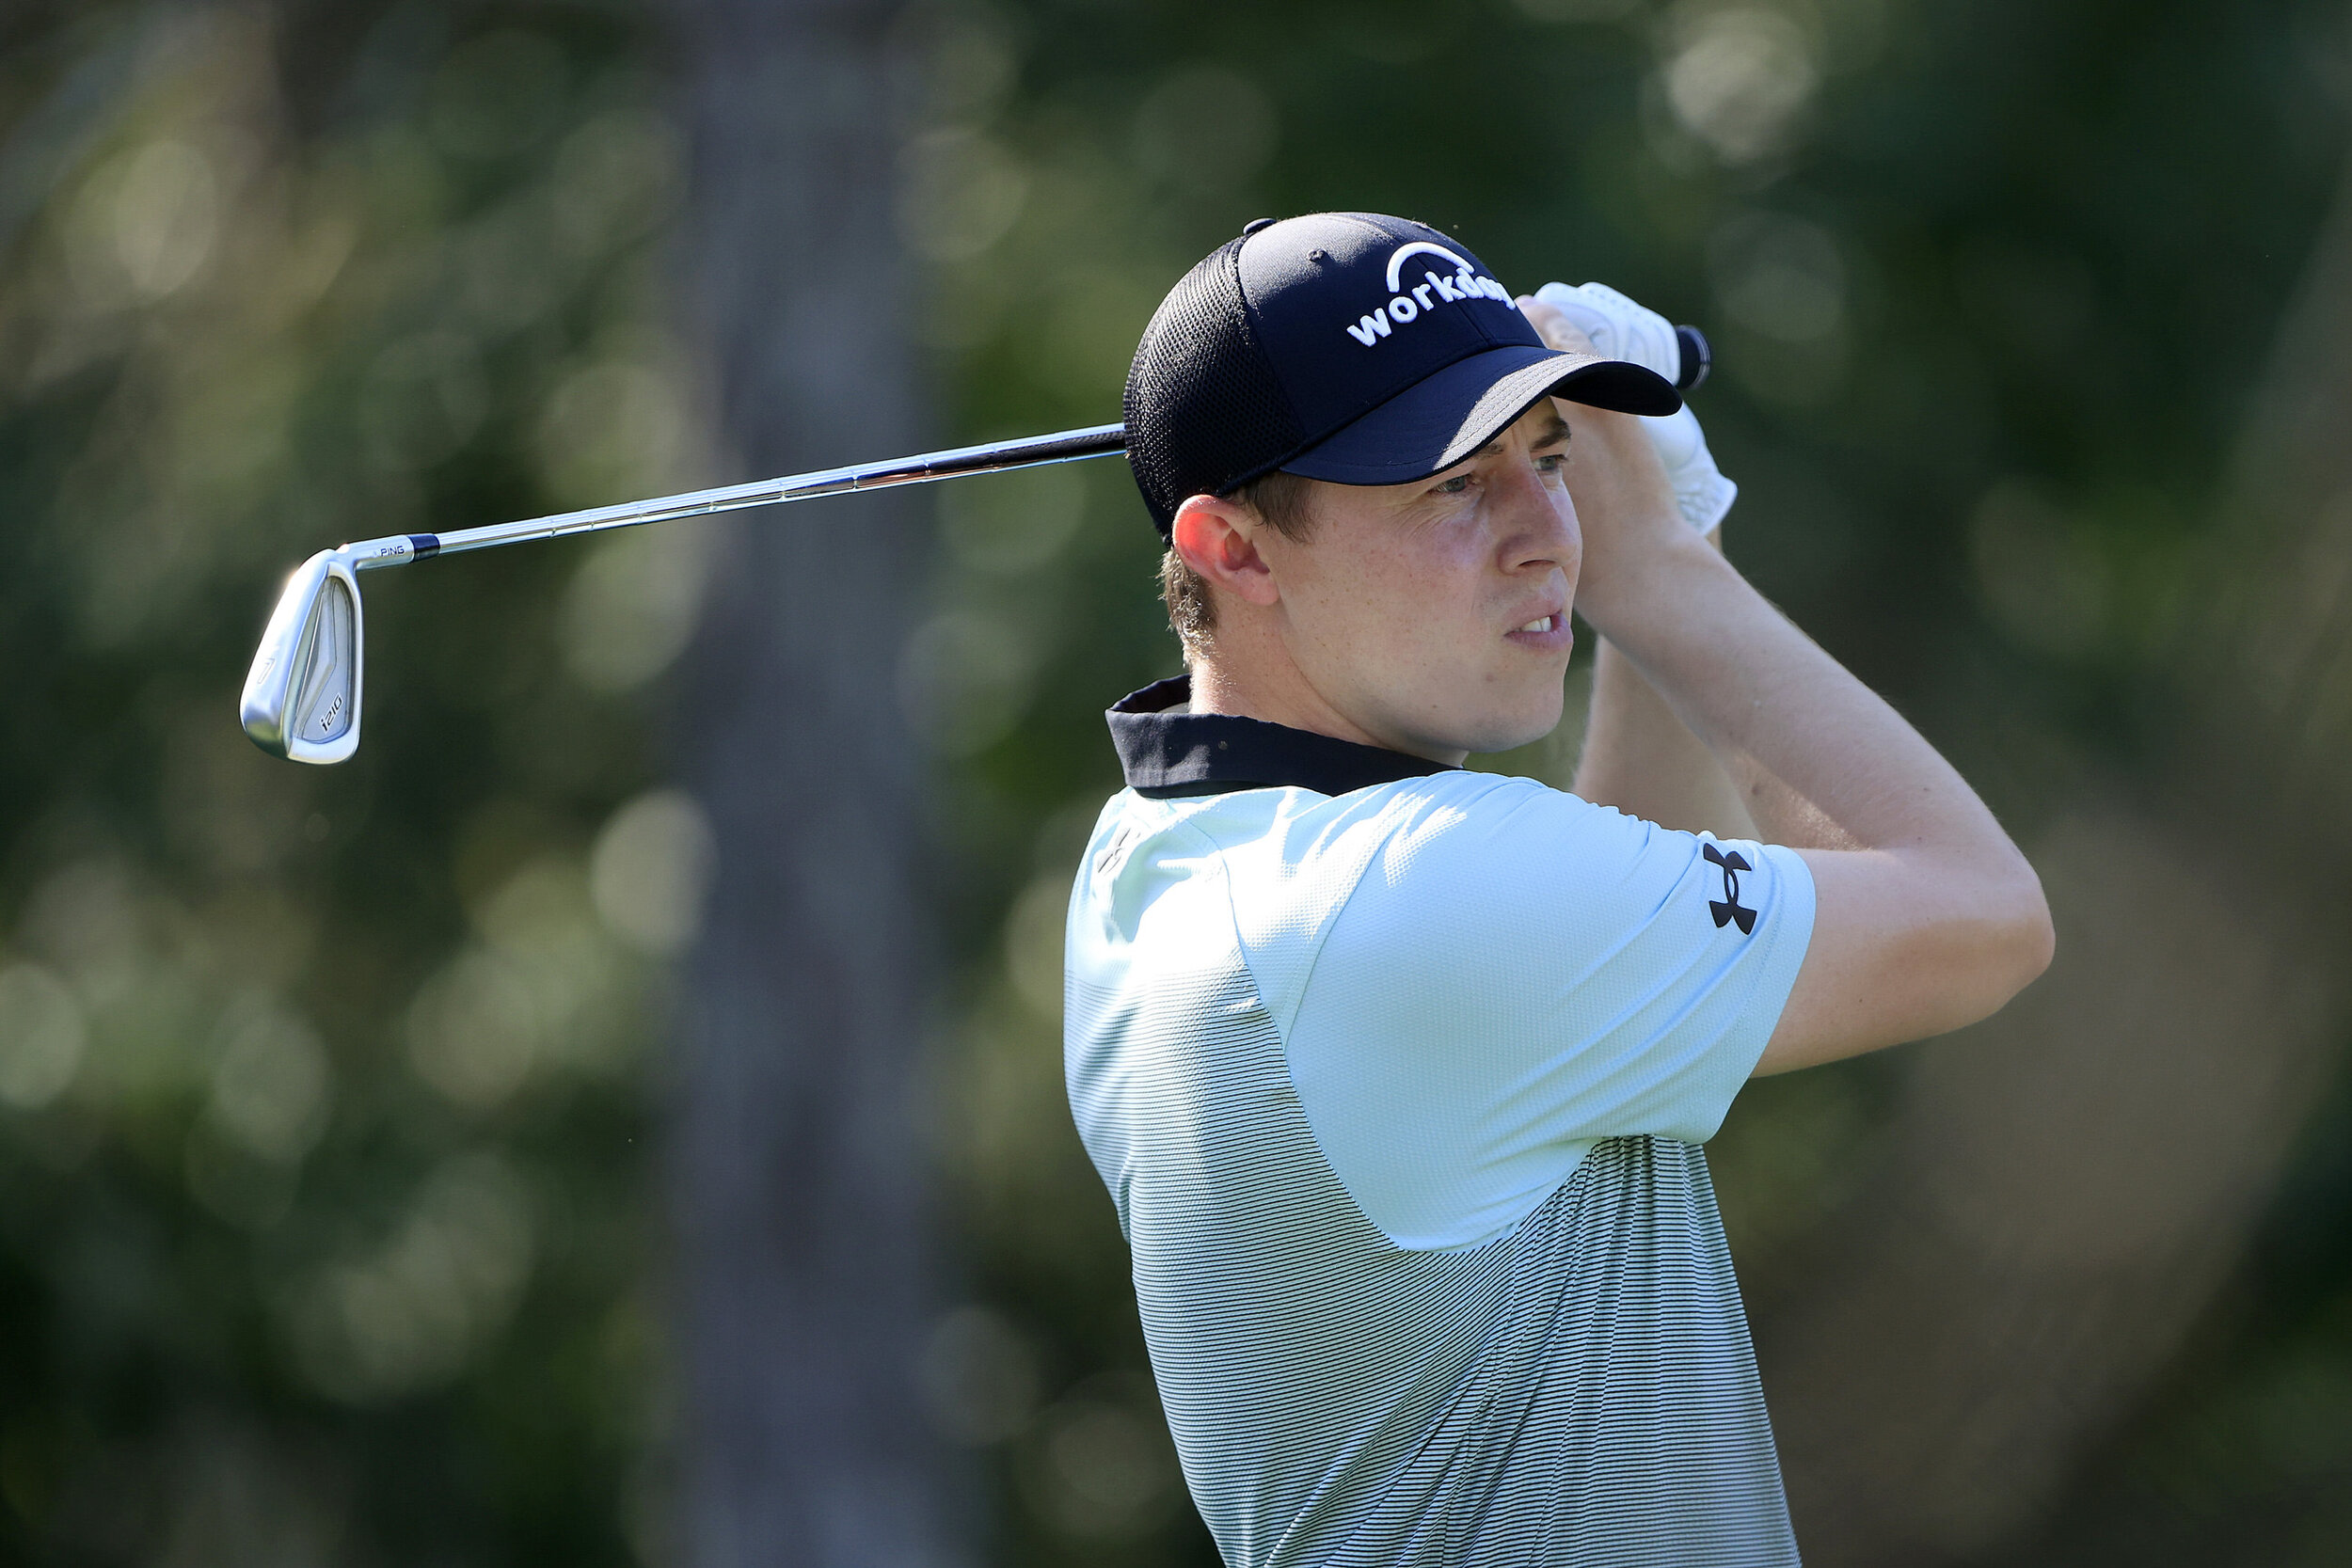  BRADENTON, FLORIDA - FEBRUARY 25: Matt Fitzpatrick of England plays a shot on the sixth tee during the first round of World Golf Championships-Workday Championship at The Concession on February 25, 2021 in Bradenton, Florida. (Photo by Sam Greenwood